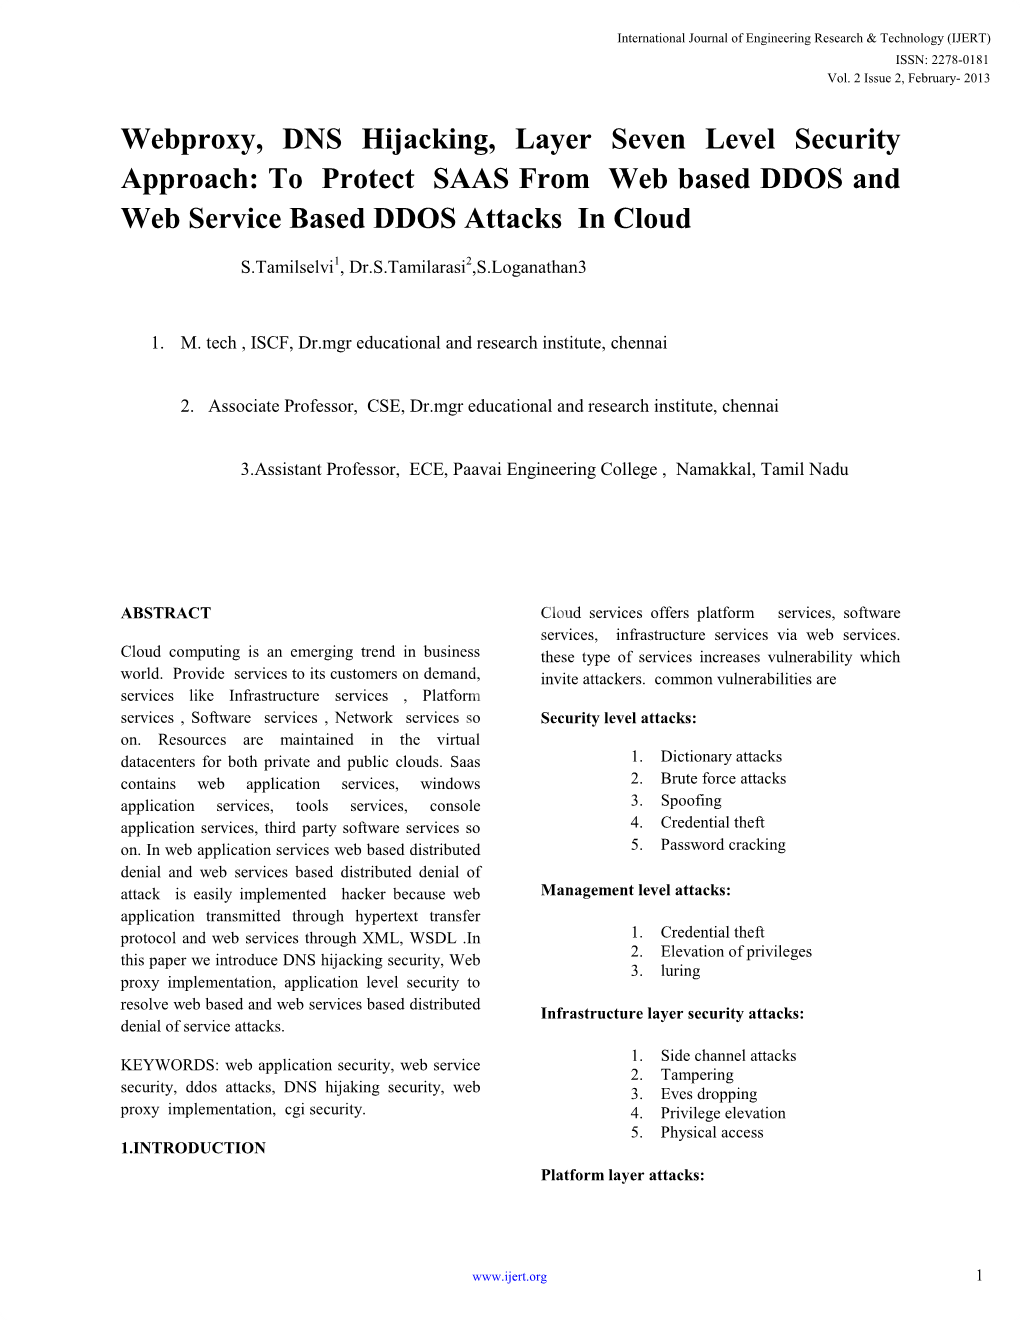 Webproxy, DNS Hijacking, Layer Seven Level Security Approach: to Protect SAAS from Web Based DDOS and Web Service Based DDOS Attacks in Cloud